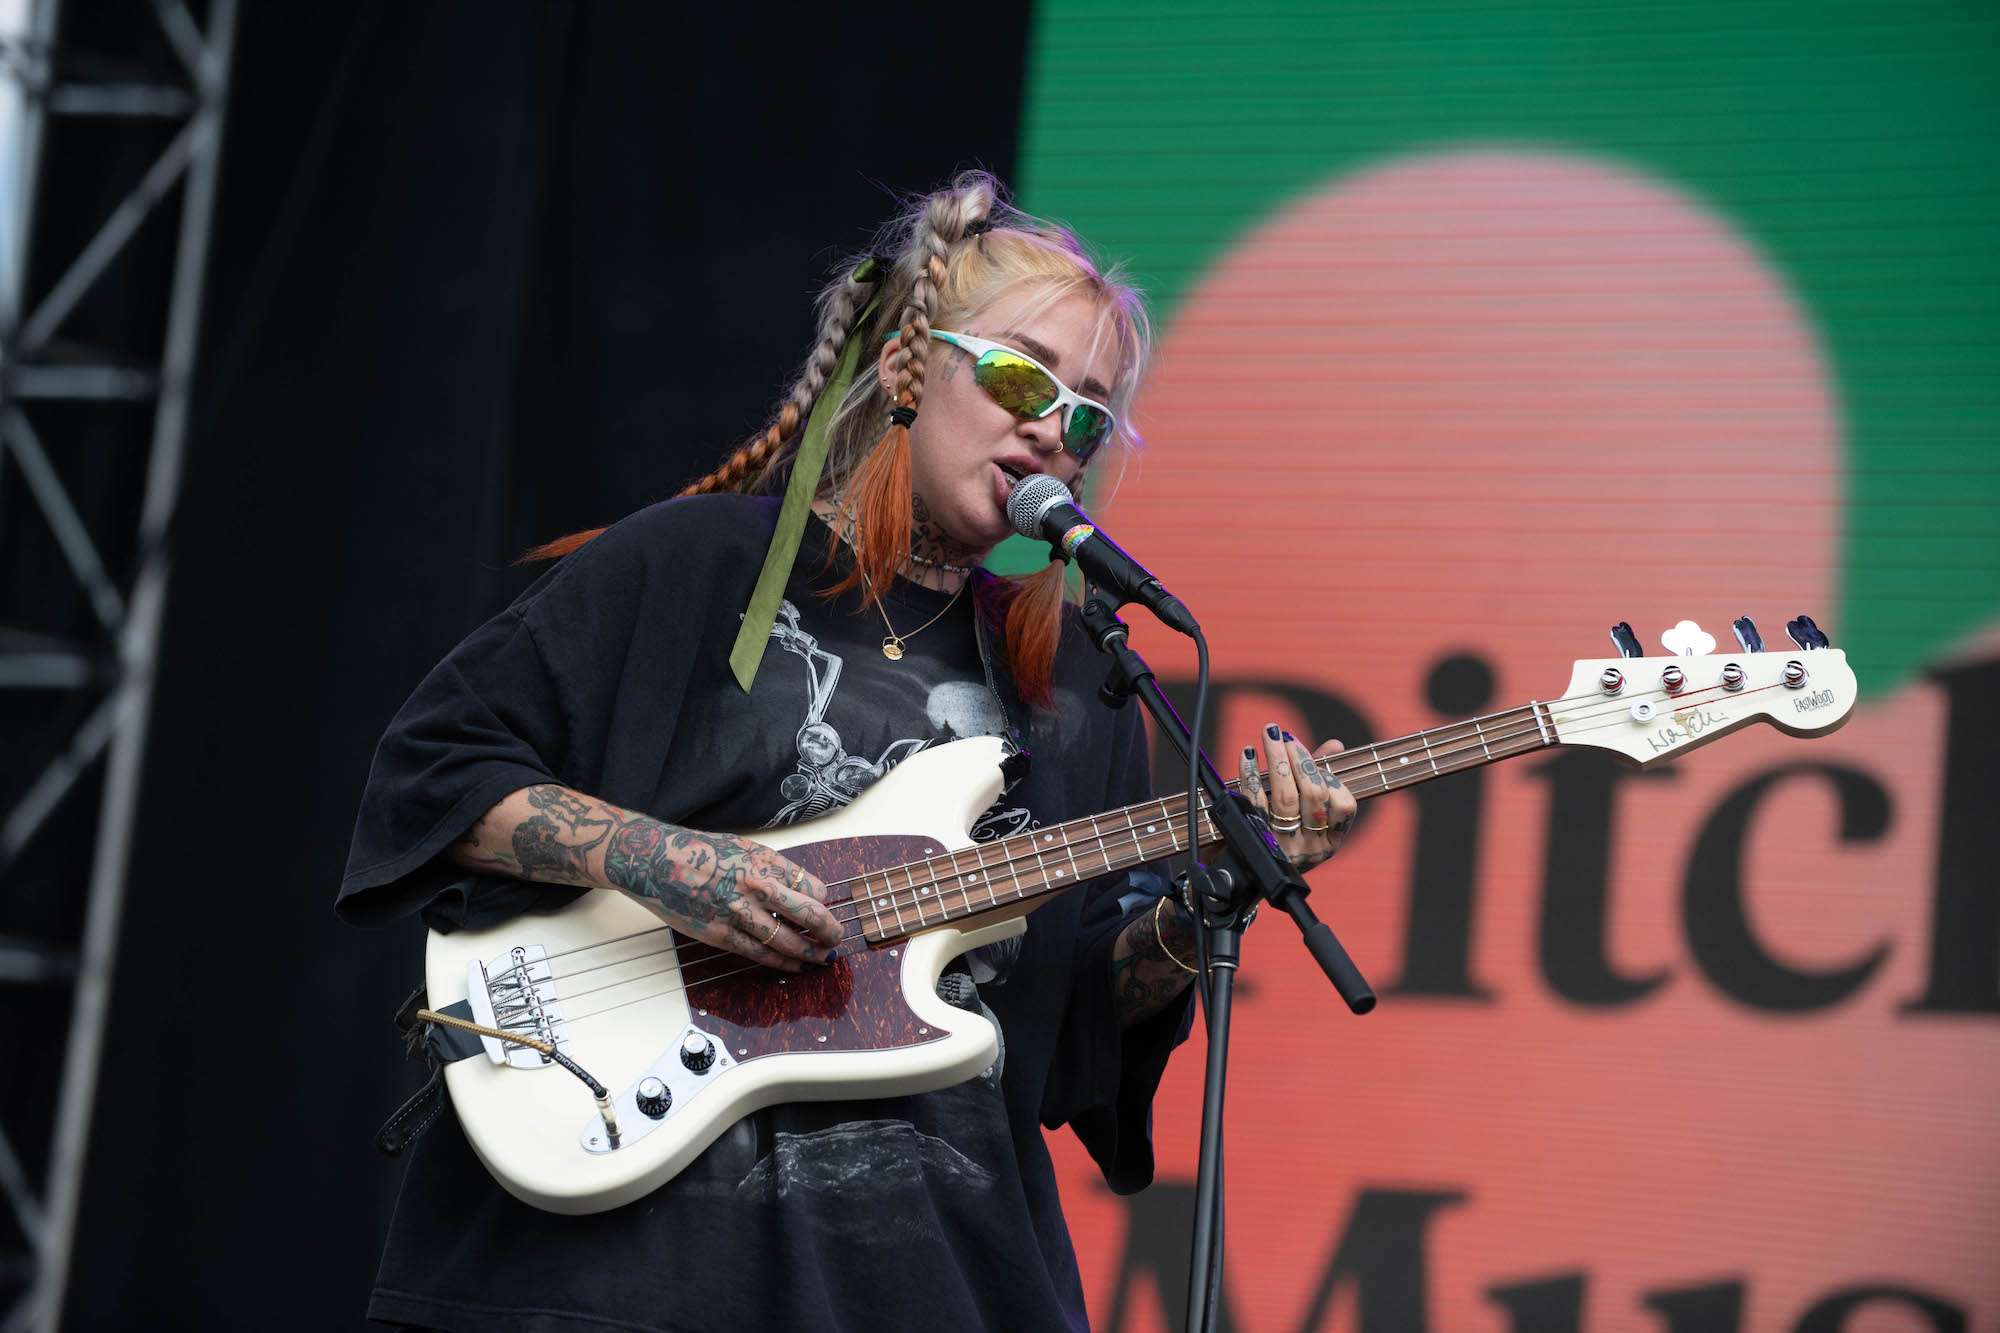 DEHD Live at Pitchfork [GALLERY] 2